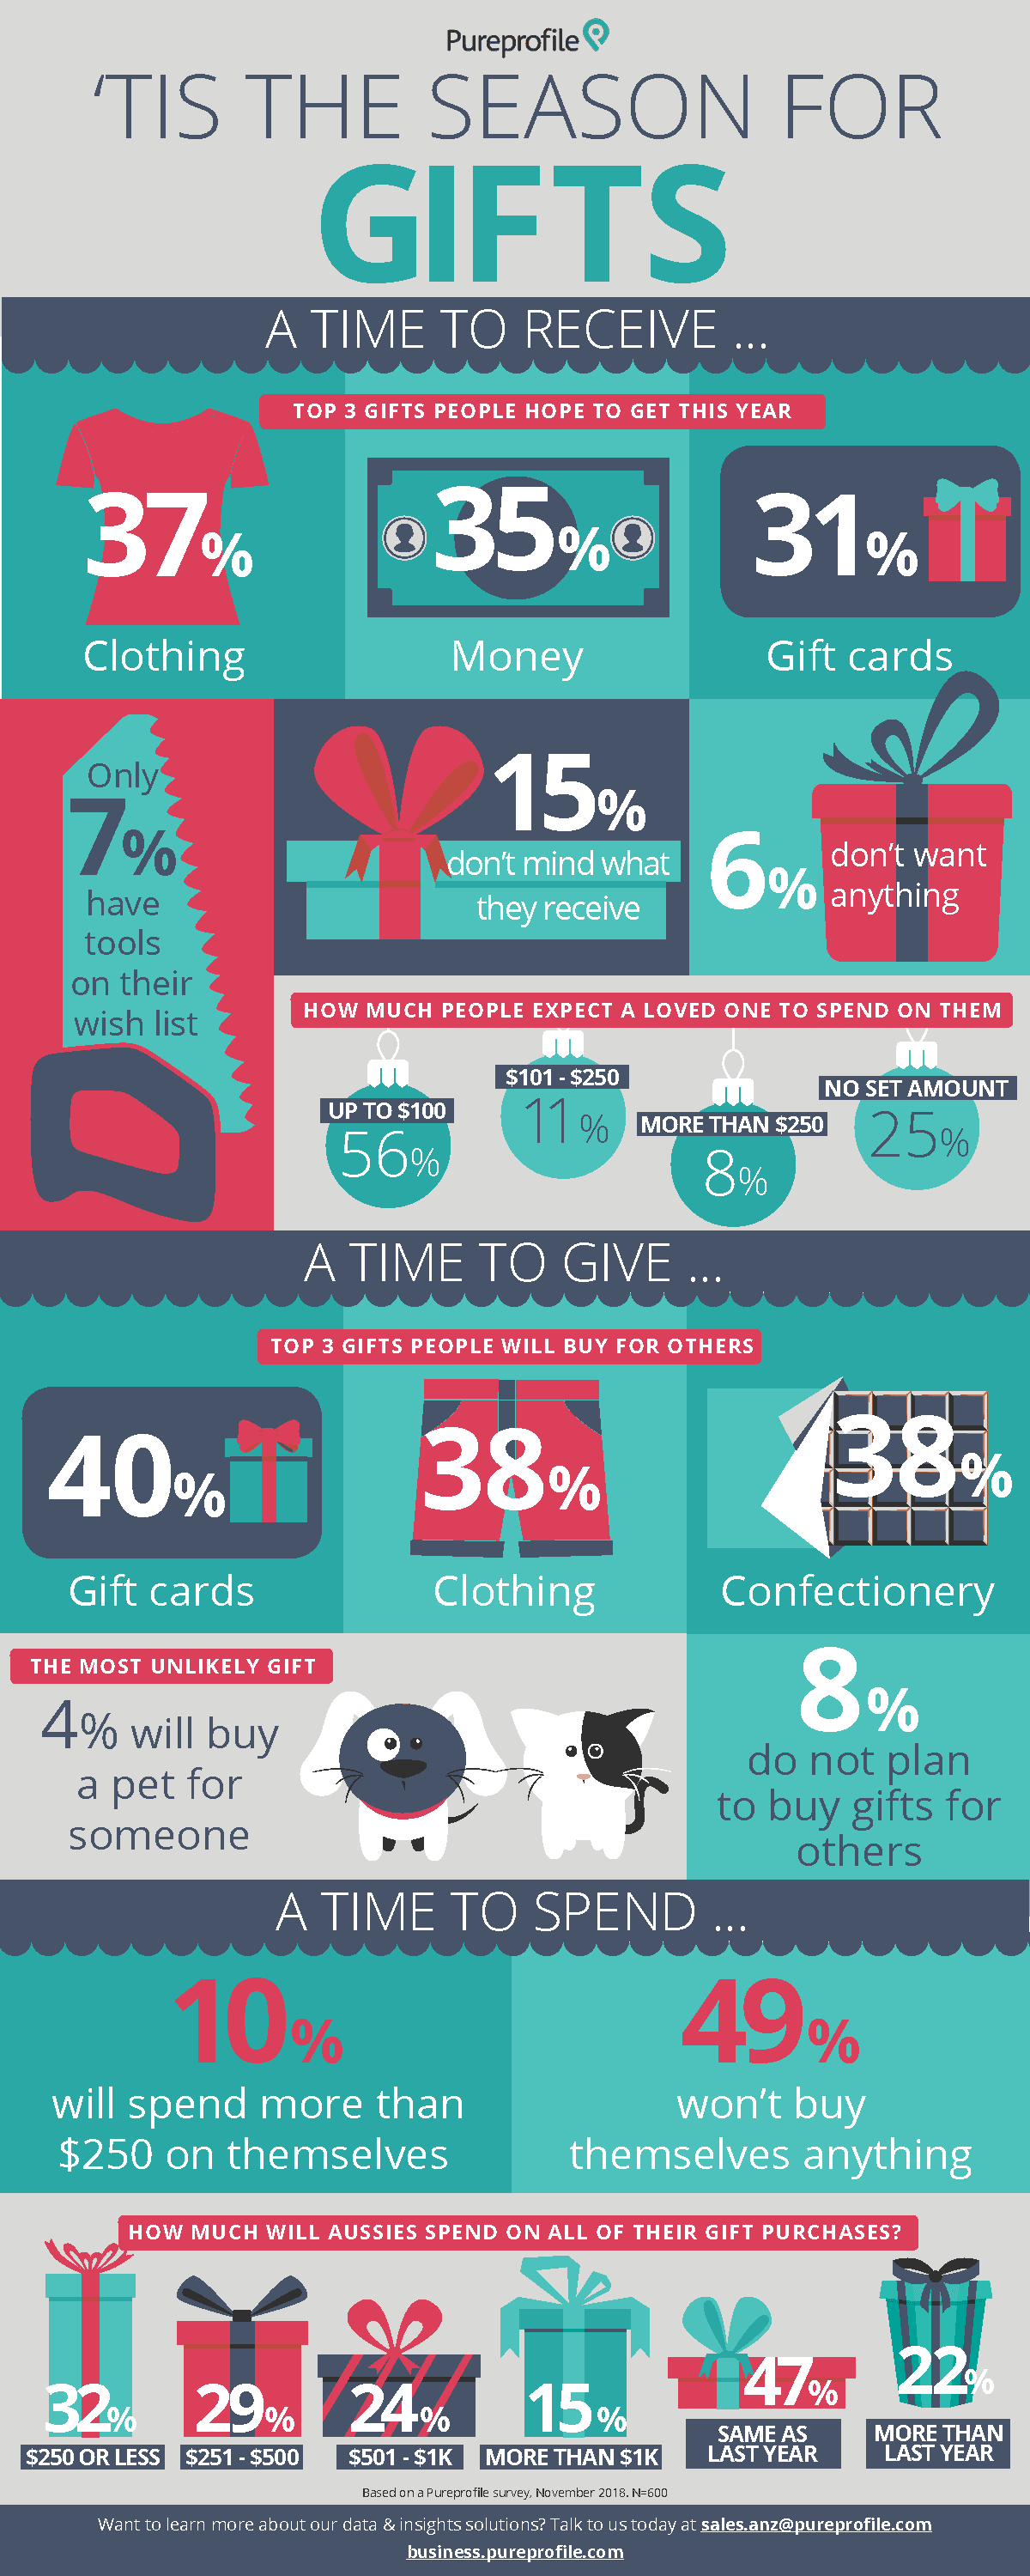 Christmas-gifts-infographic 